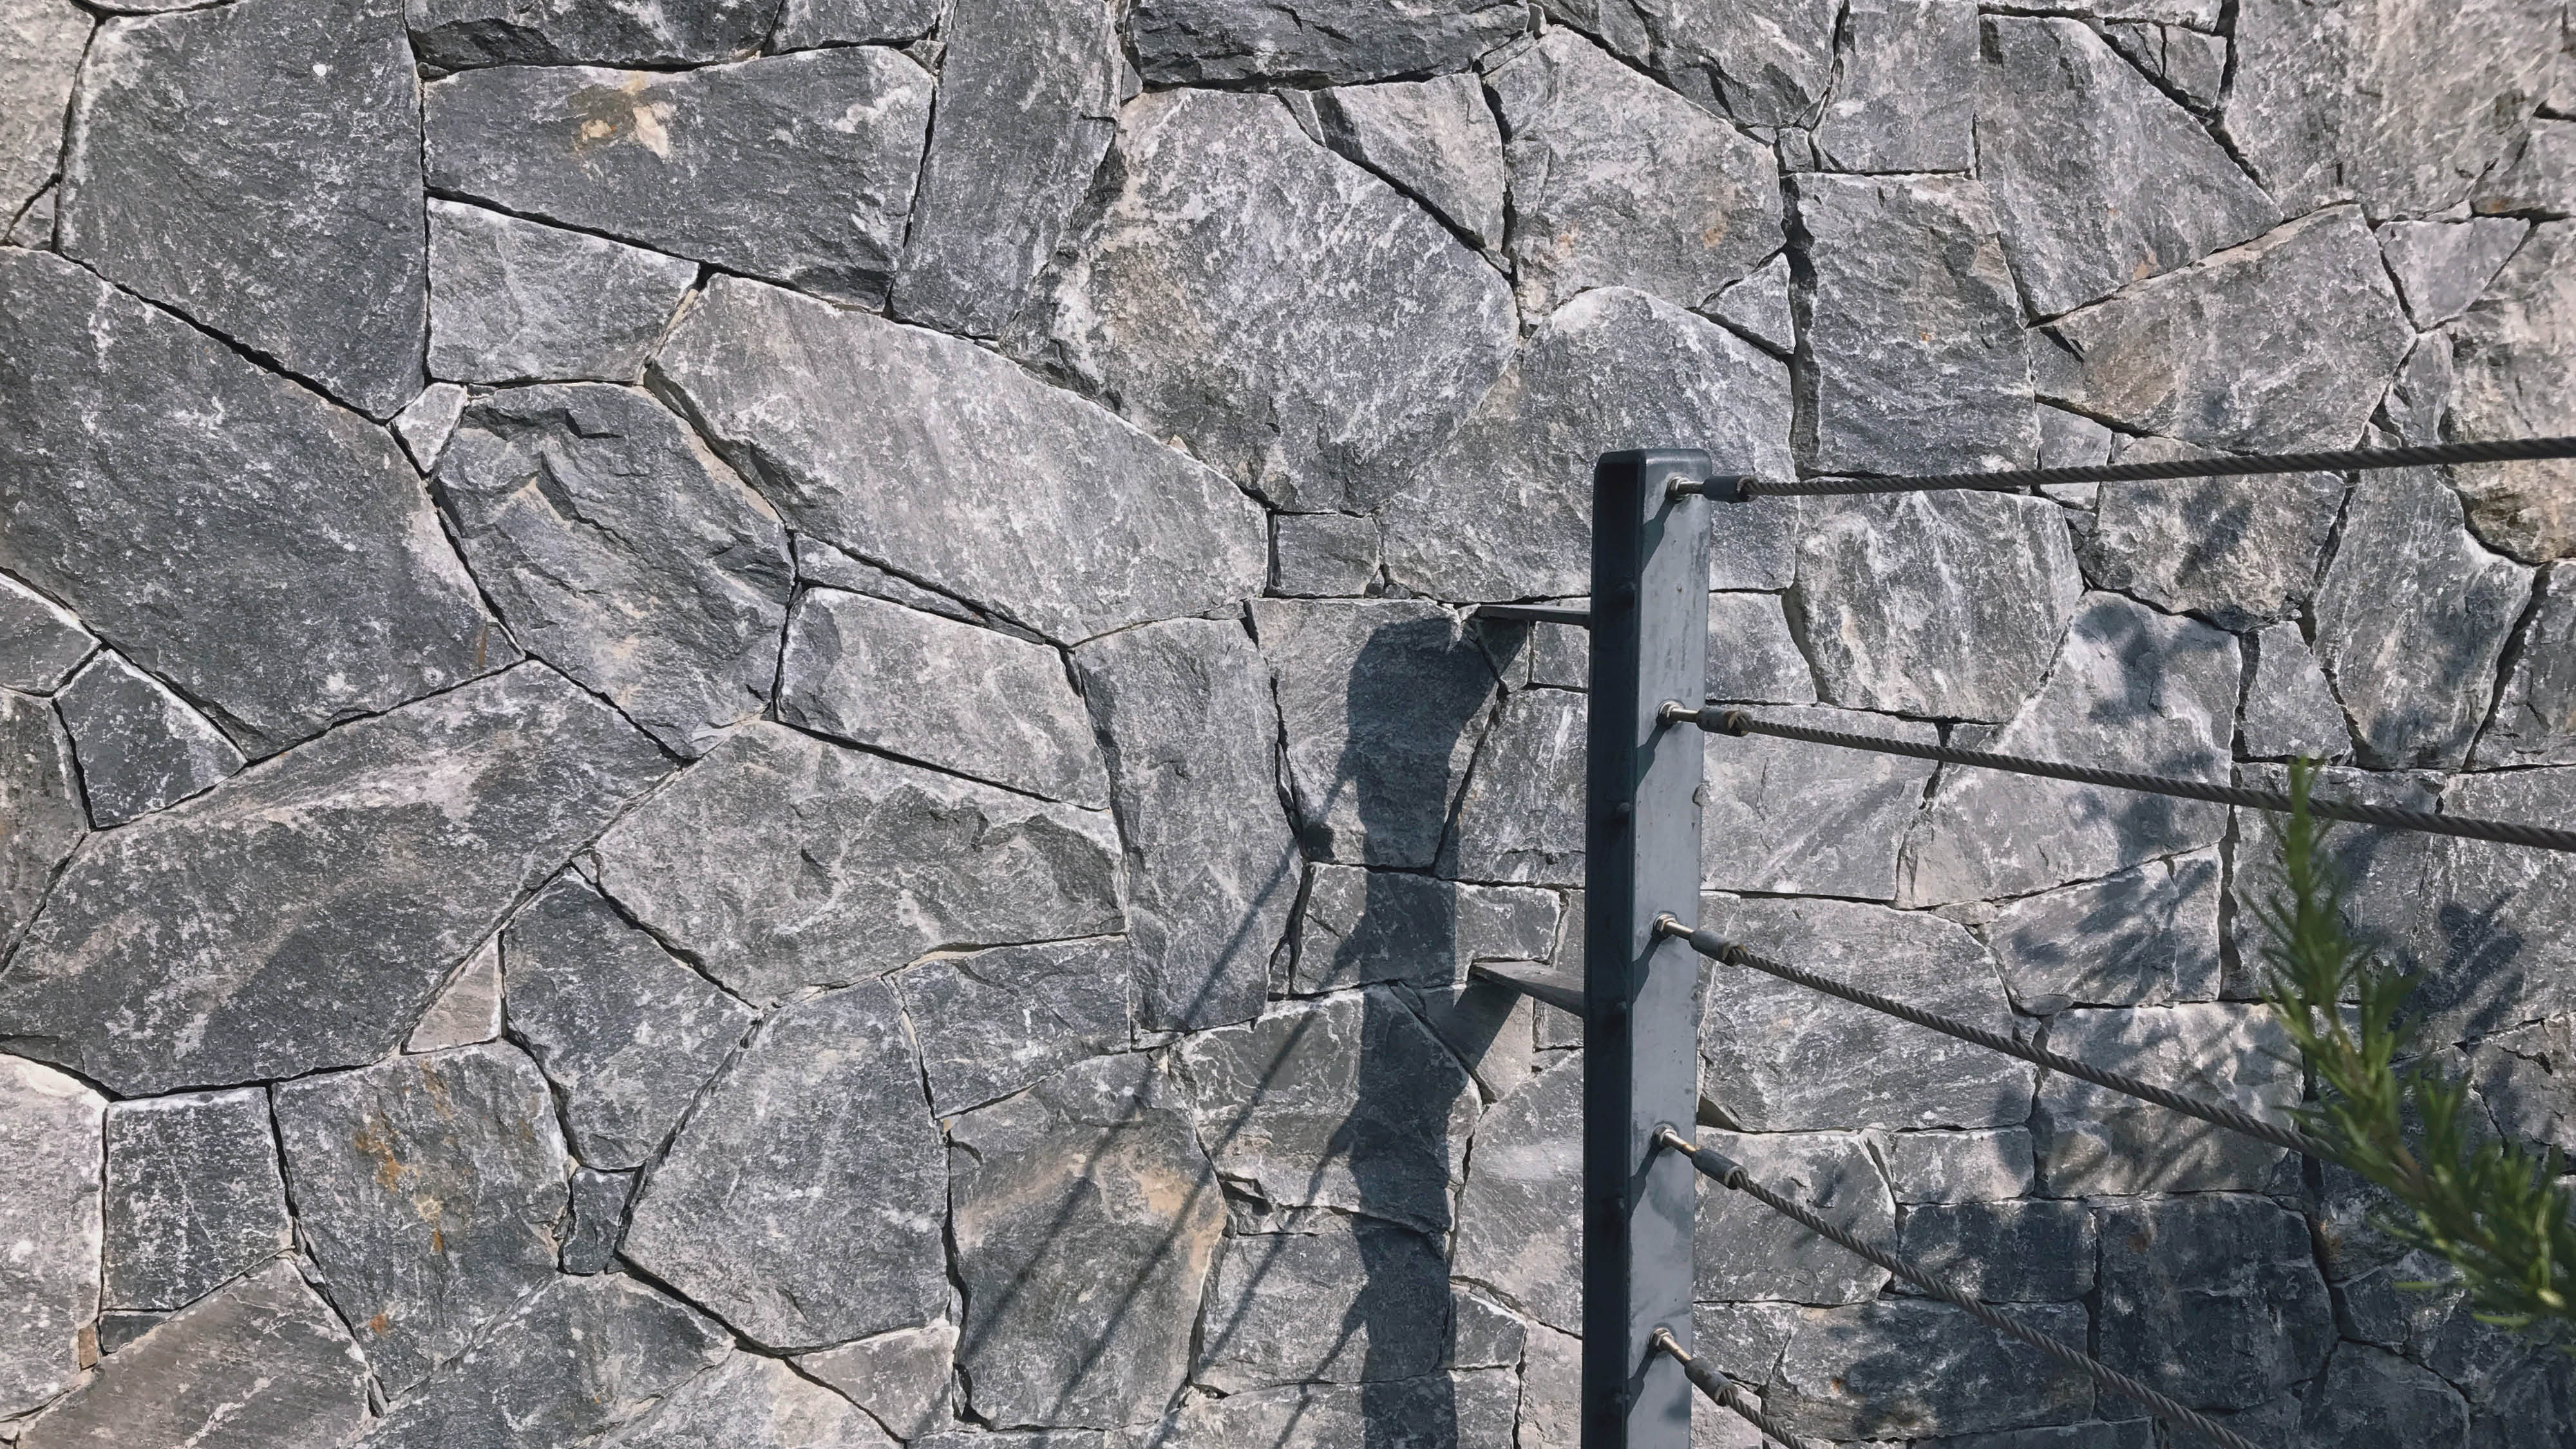 Smokey Mountain Rock Face by ErthCoverings